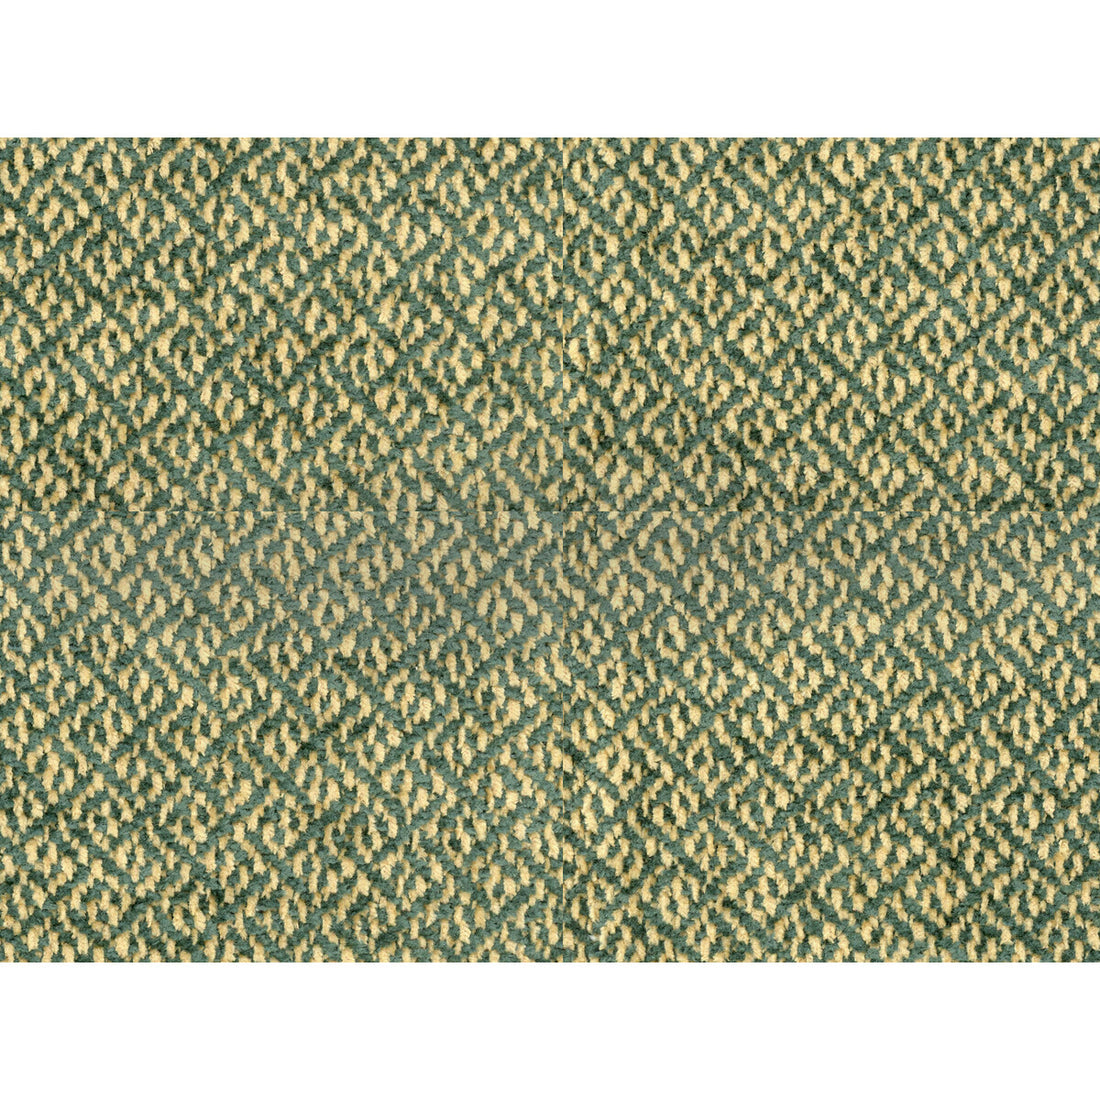 Cottian Chenille fabric in emerald color - pattern 8016110.53.0 - by Brunschwig &amp; Fils in the Chambery Textures collection